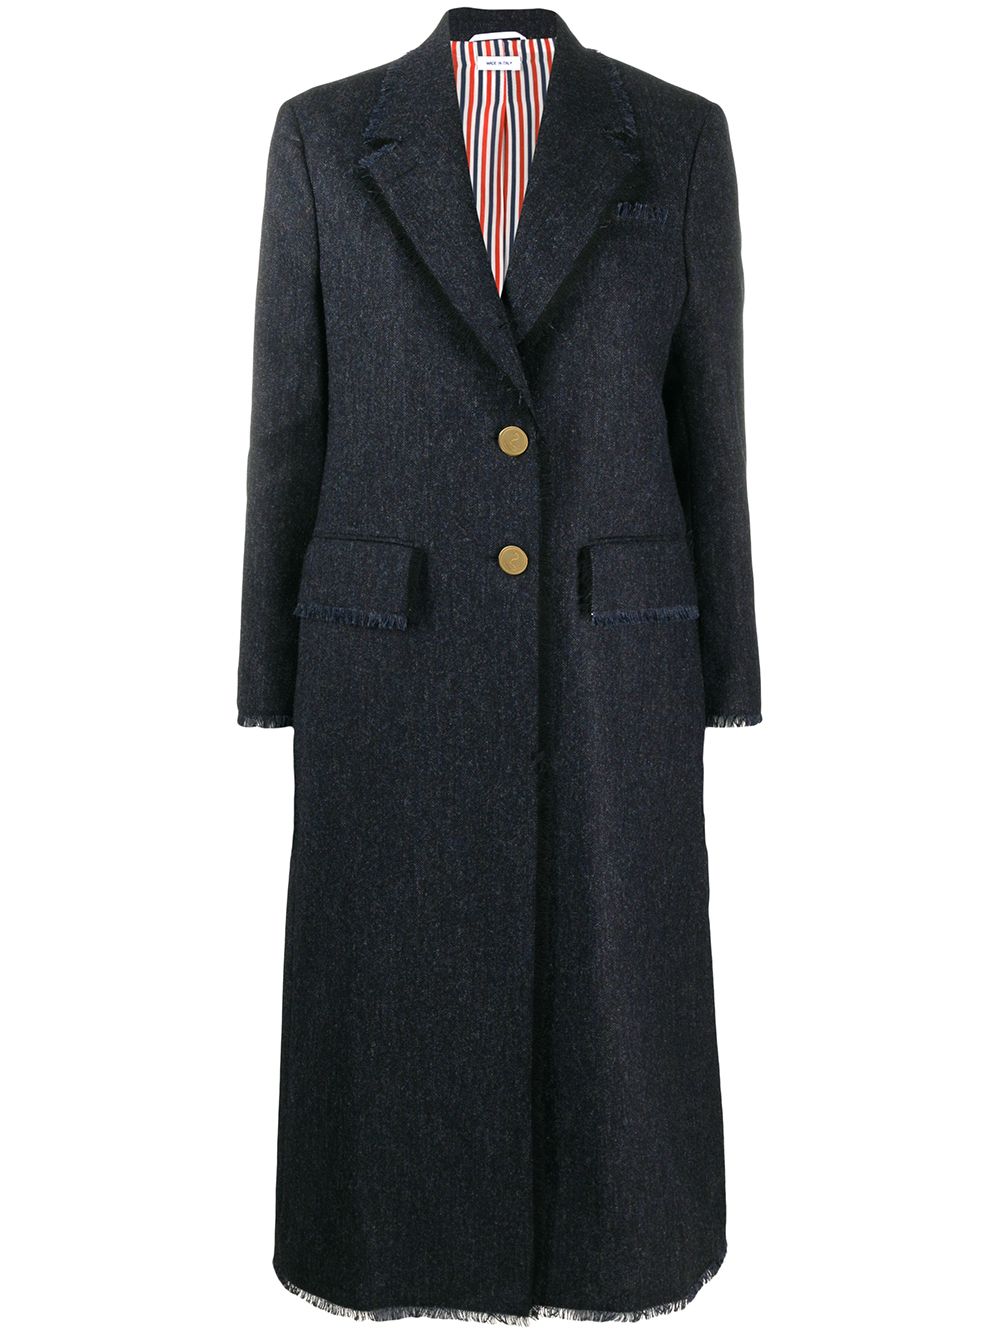 Image 1 of Thom Browne single-breasted coat